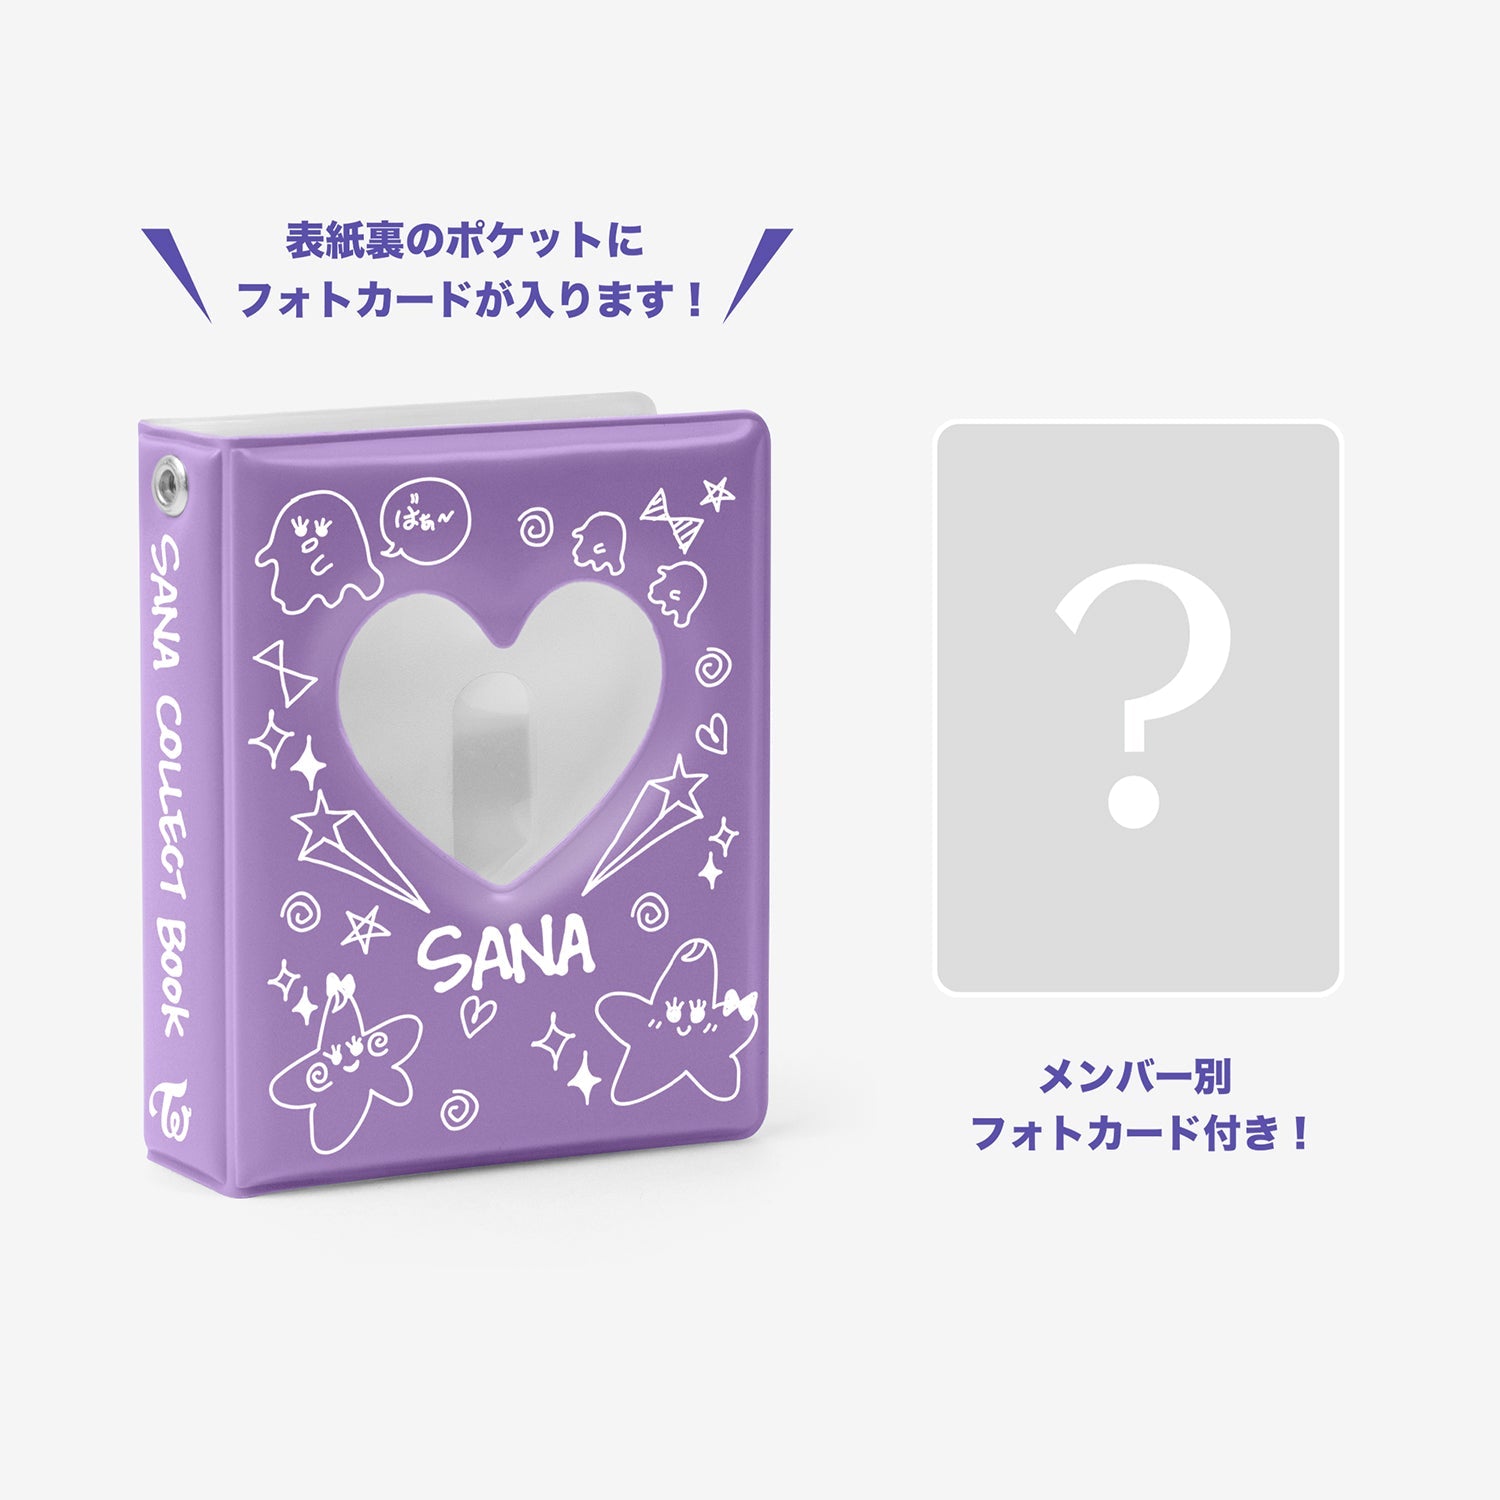 COLLECT BOOK Designed by SANA / TWICE『JAPAN DEBUT 7th Anniversary』